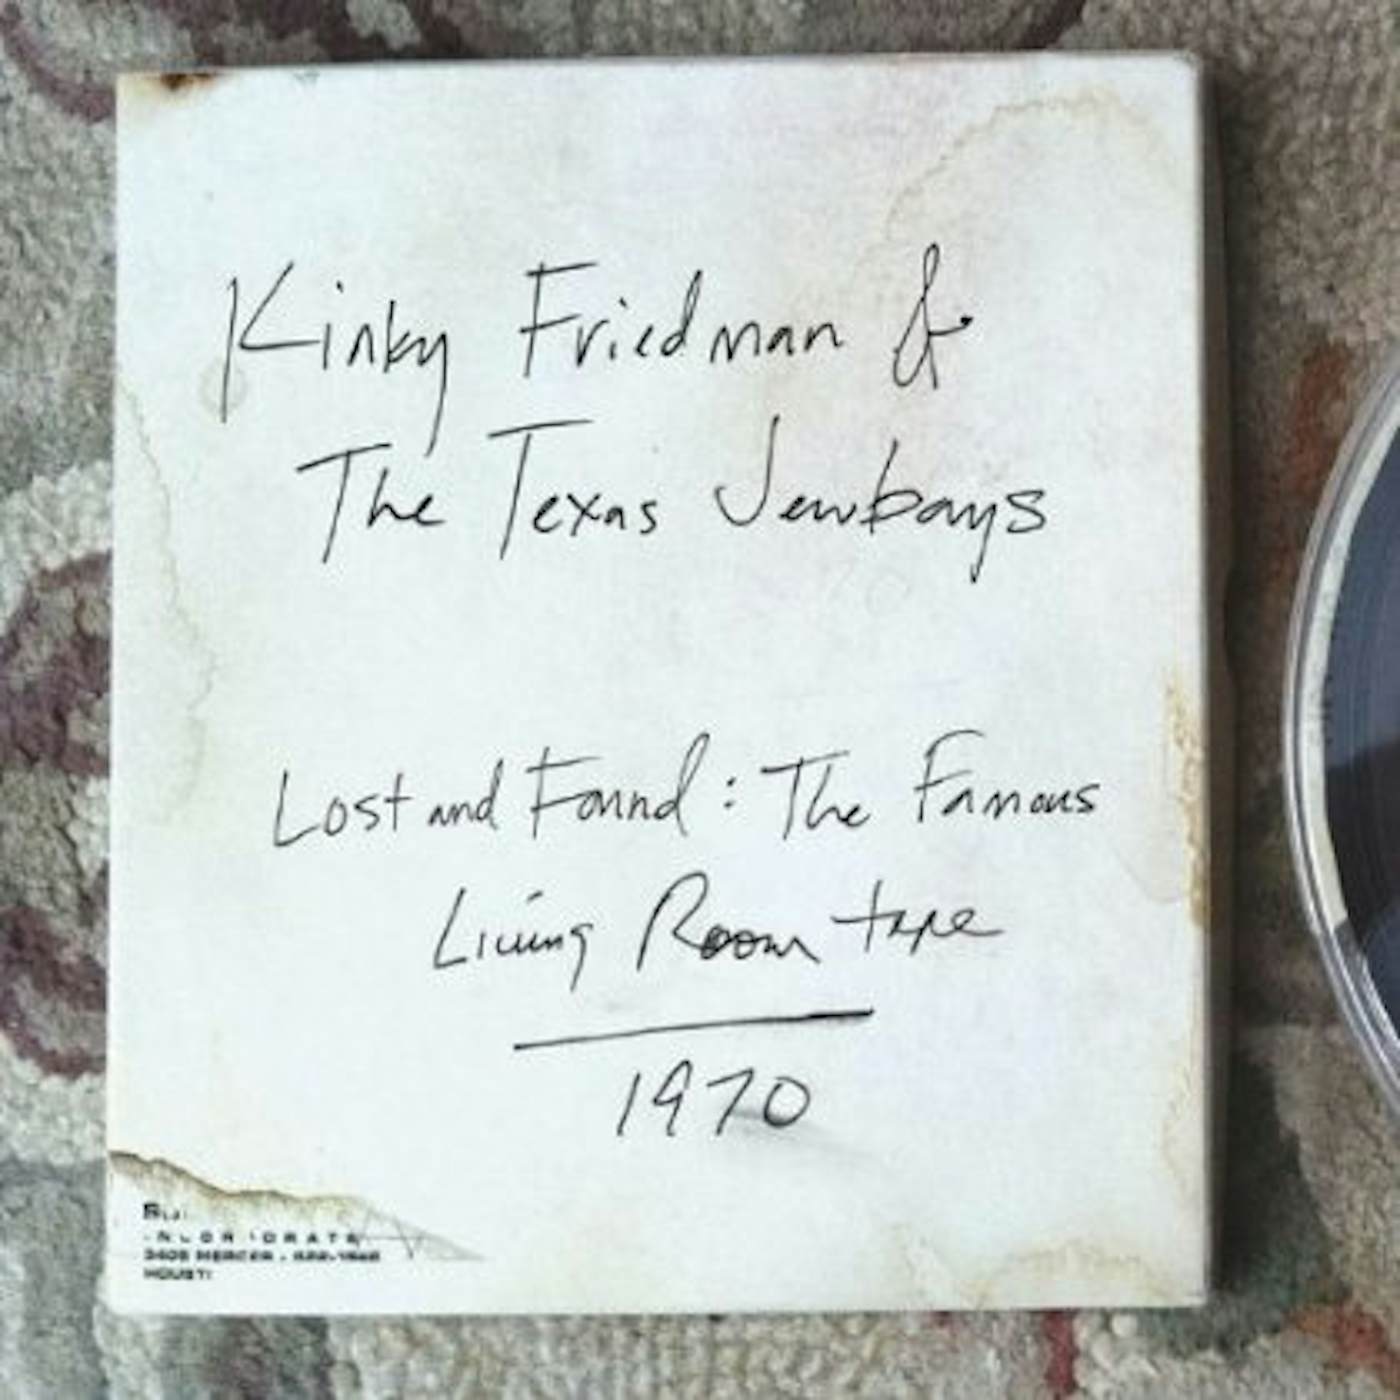 Kinky Friedman LOST & FOUND: FAMOUS LIVING ROOM TAPE CD